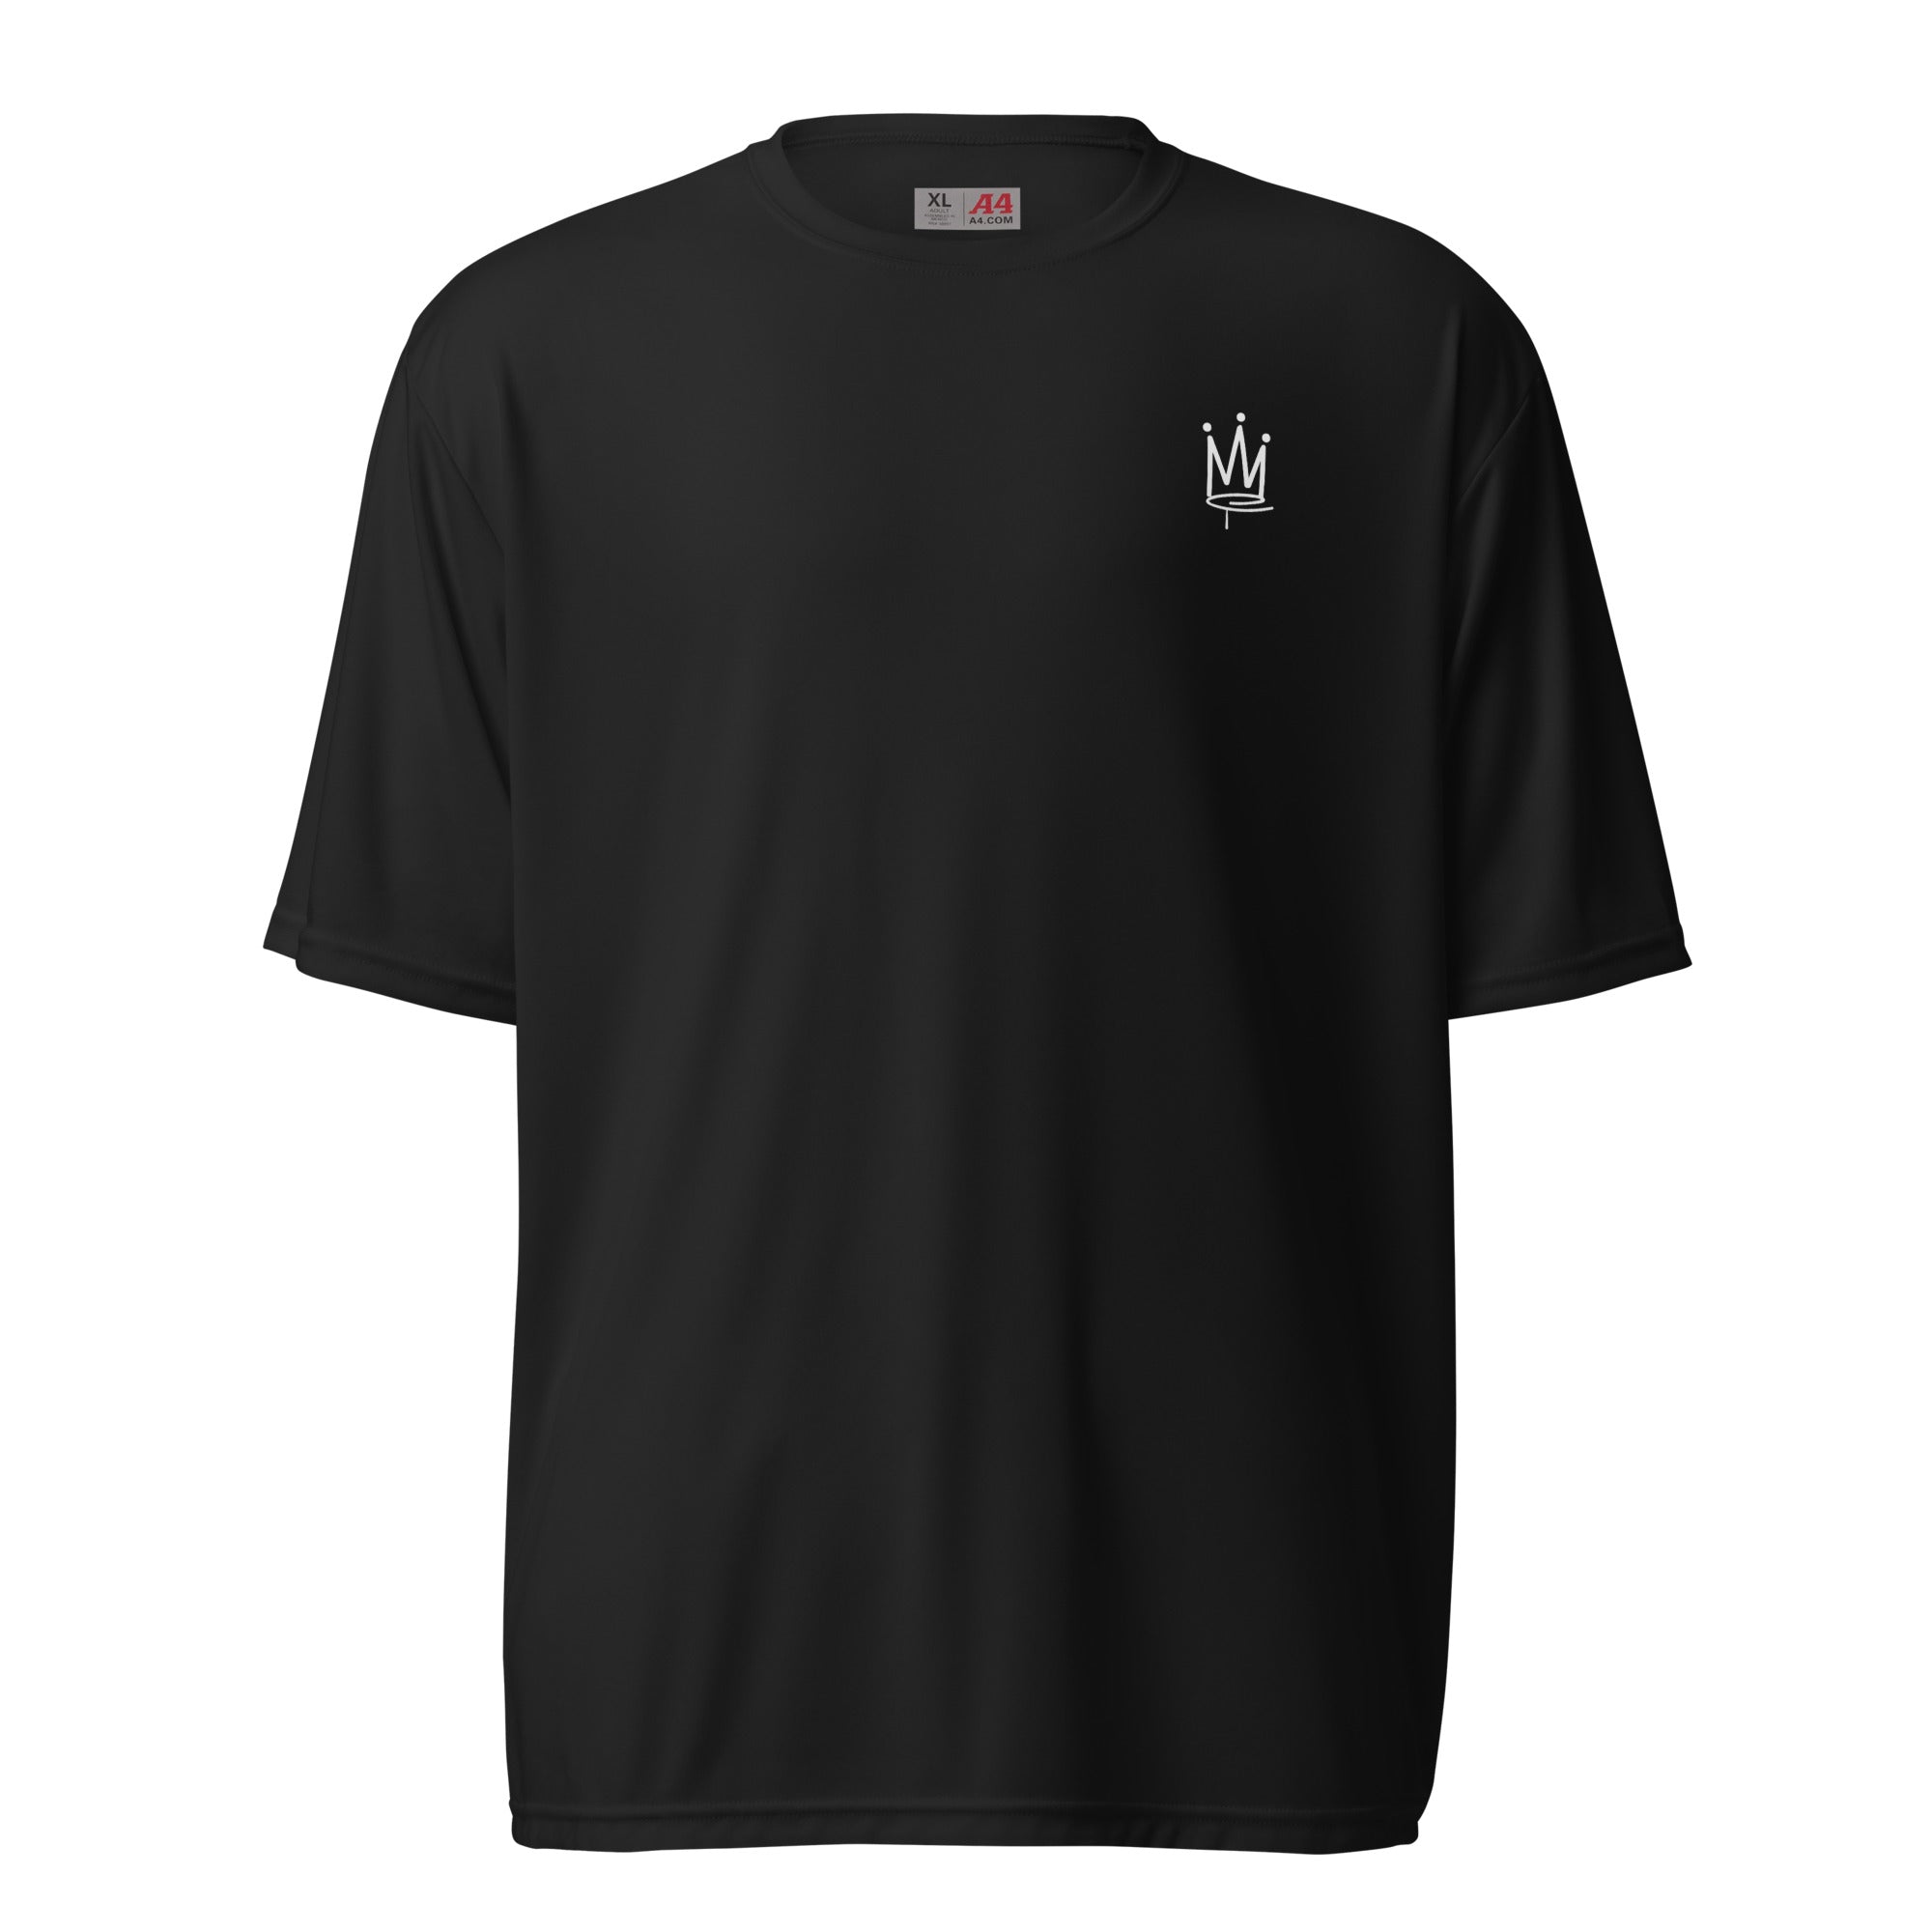 Crowned & Co Unisex performance crew neck t-shirt